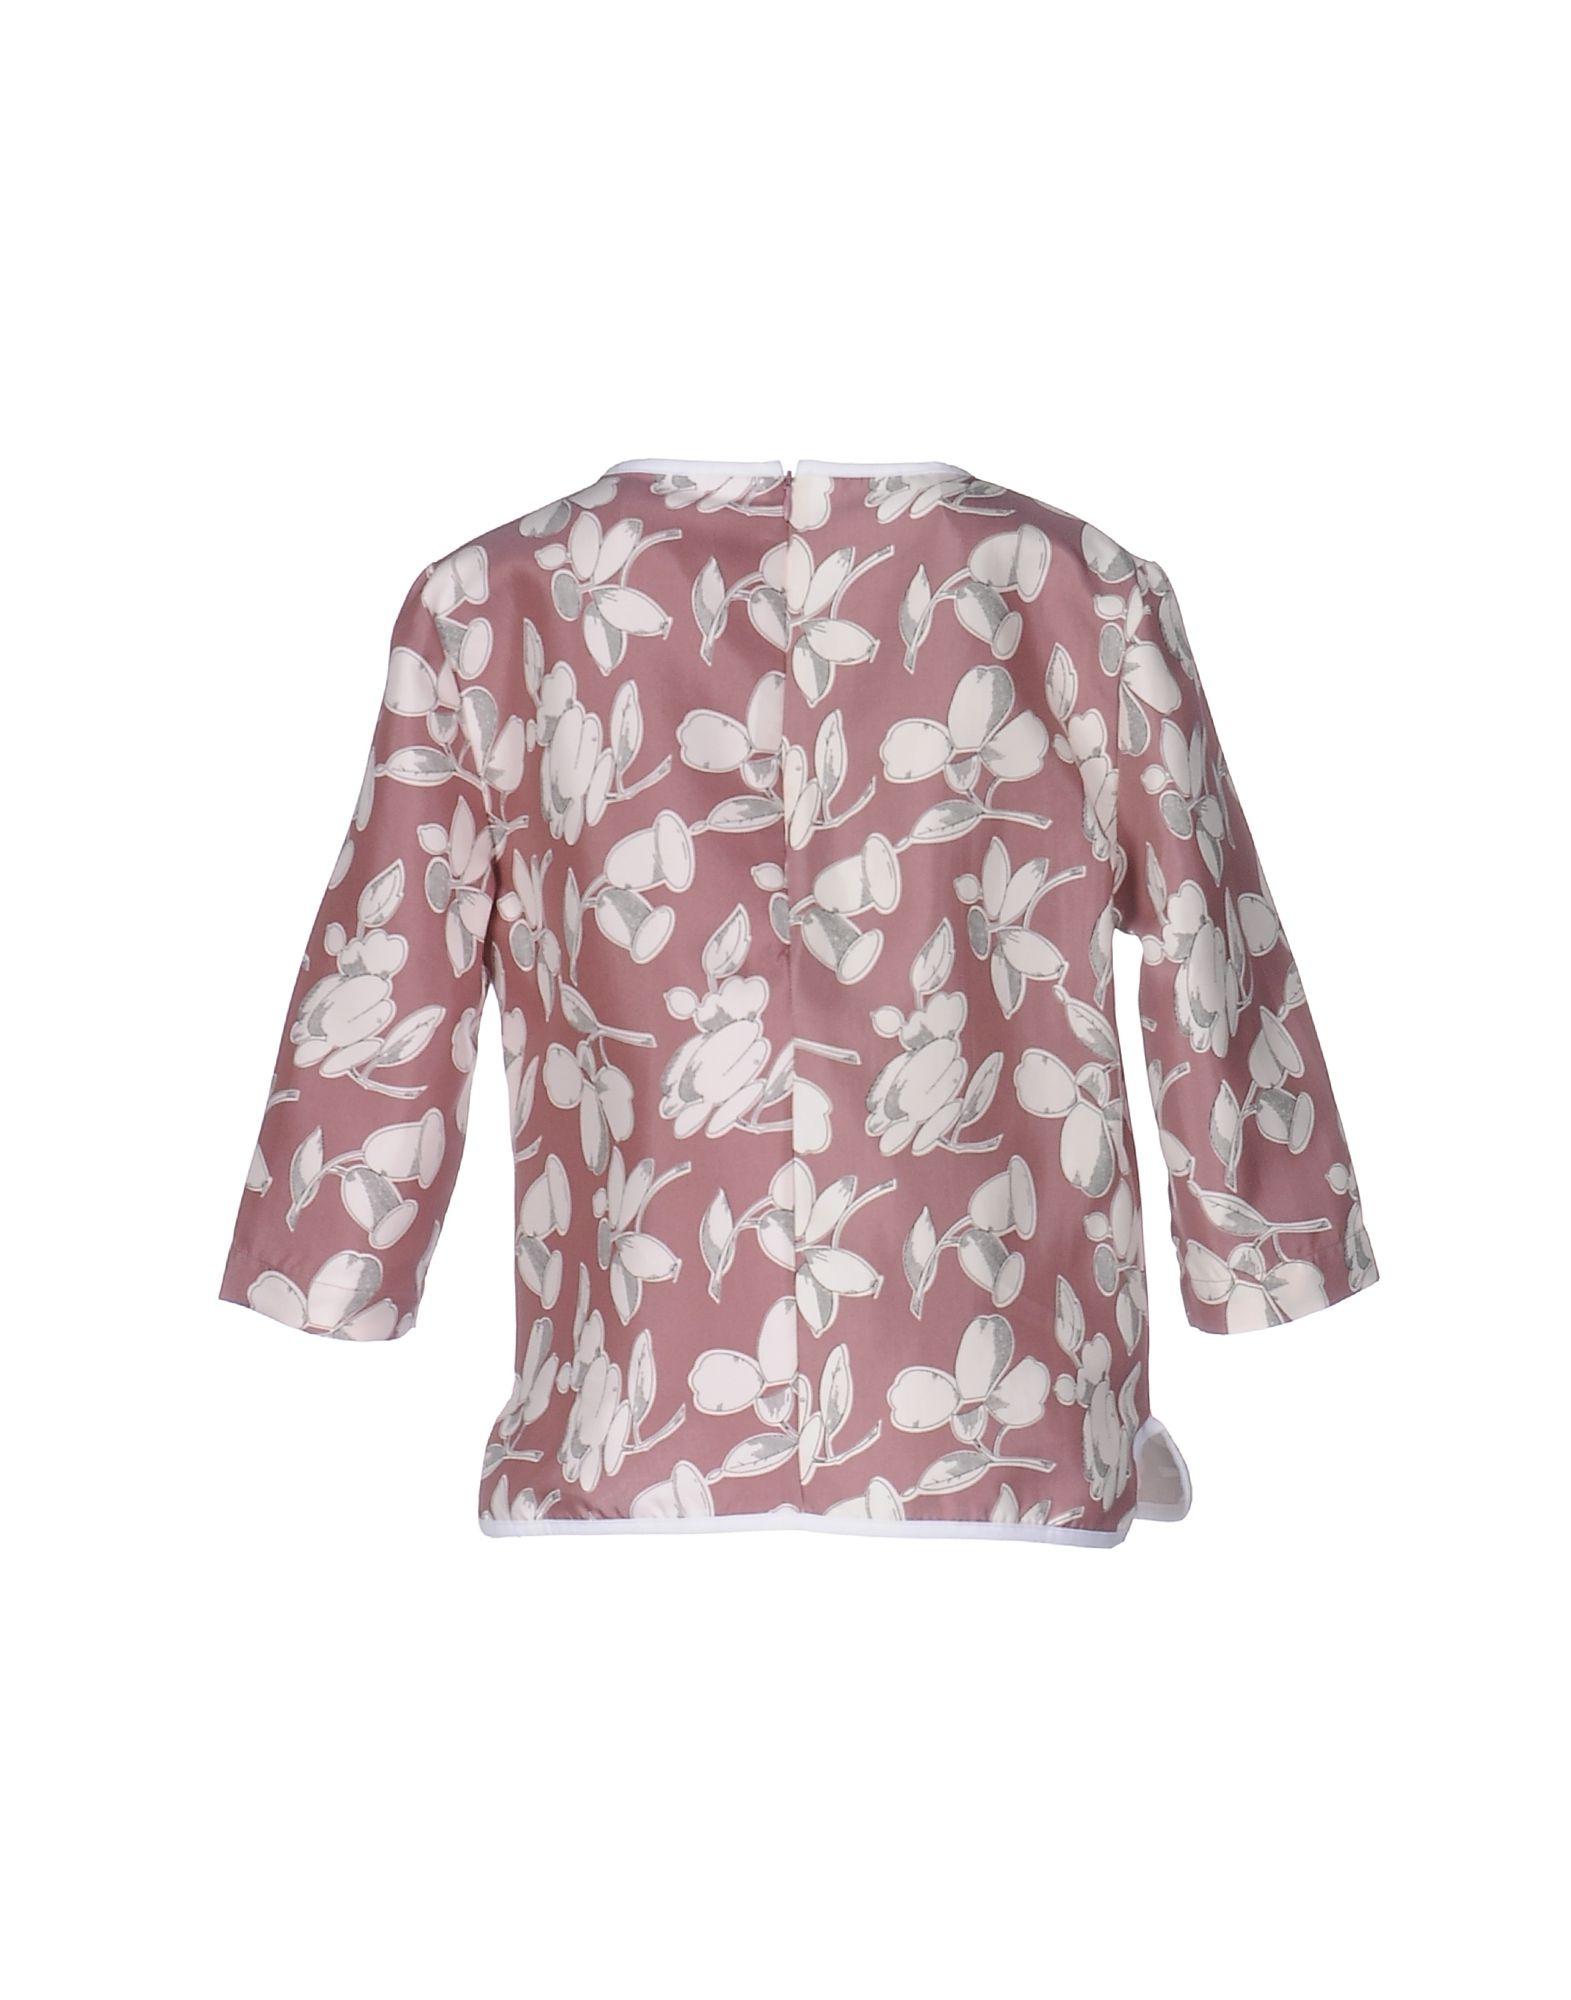 Lyst - Marni Blouse in Pink